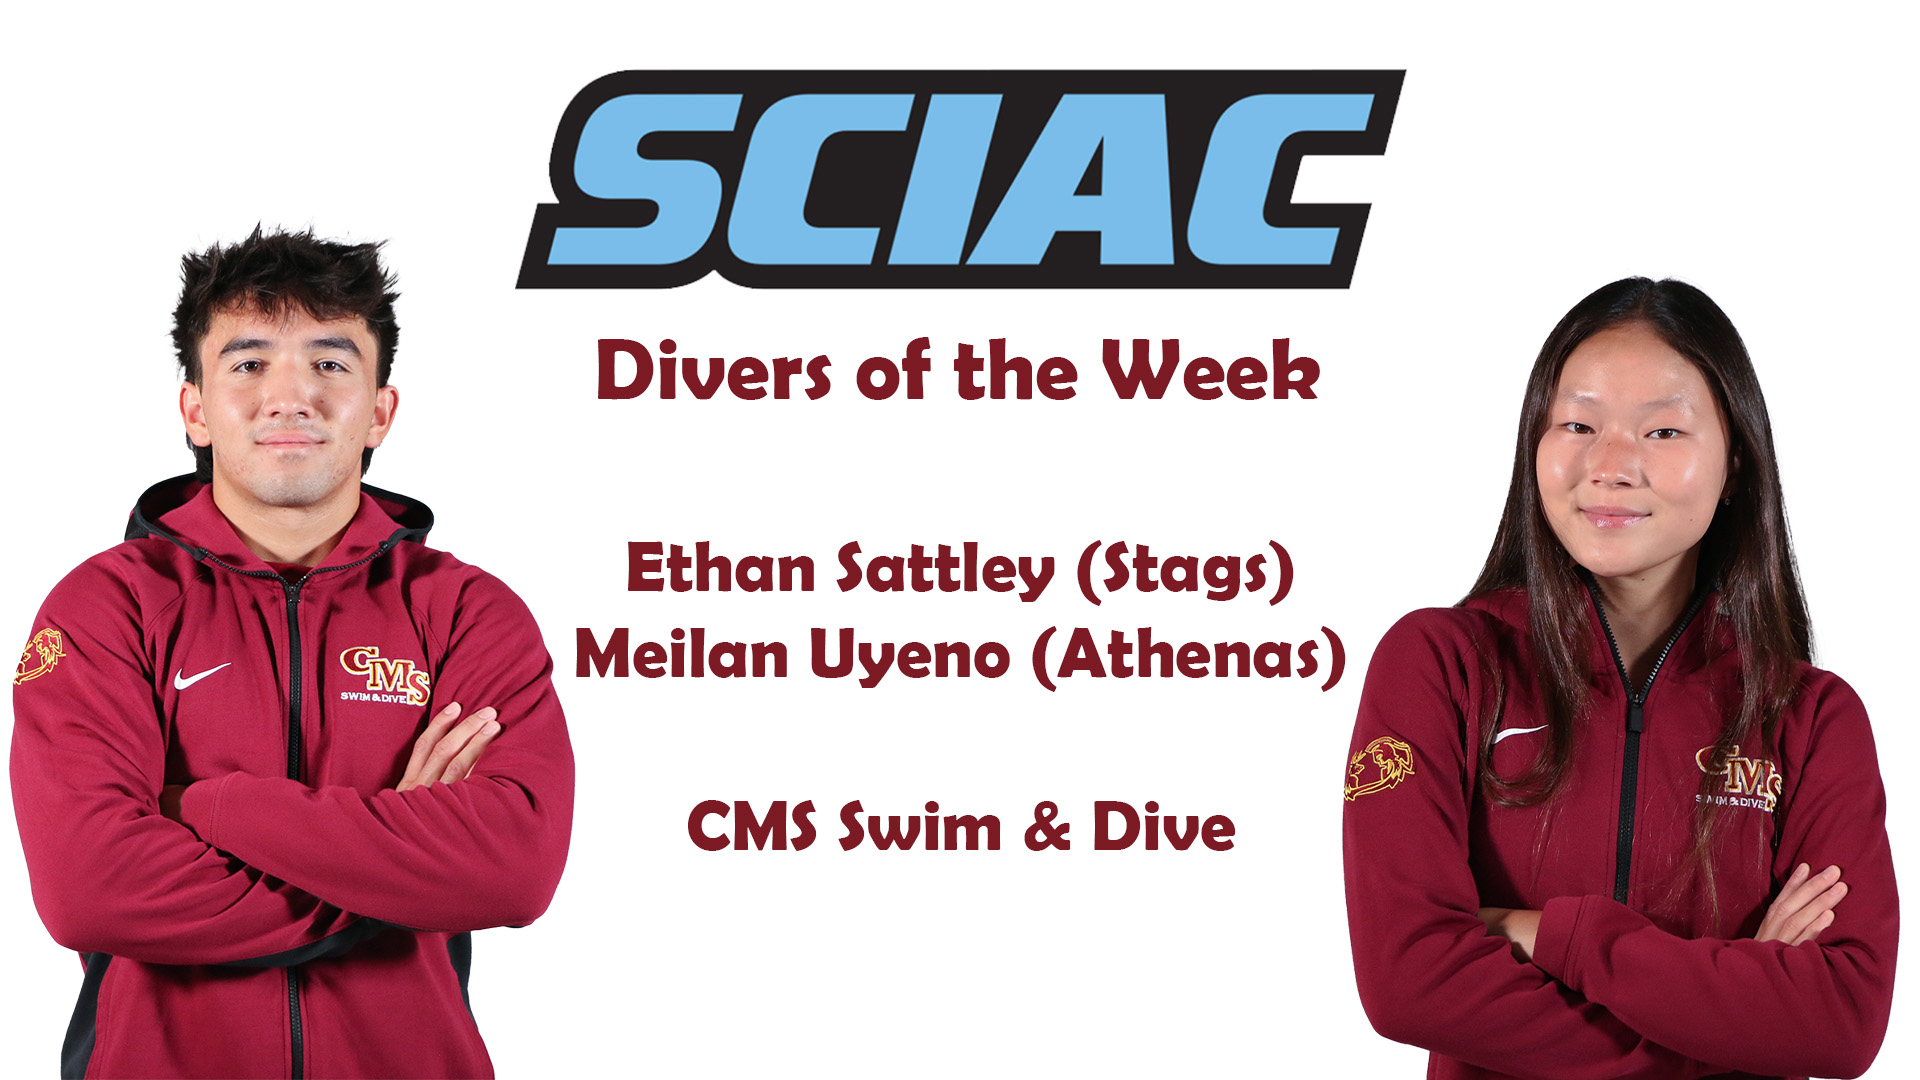 posed shots of Ethan Sattley and Meilan Uyeno with the SCIAC logo